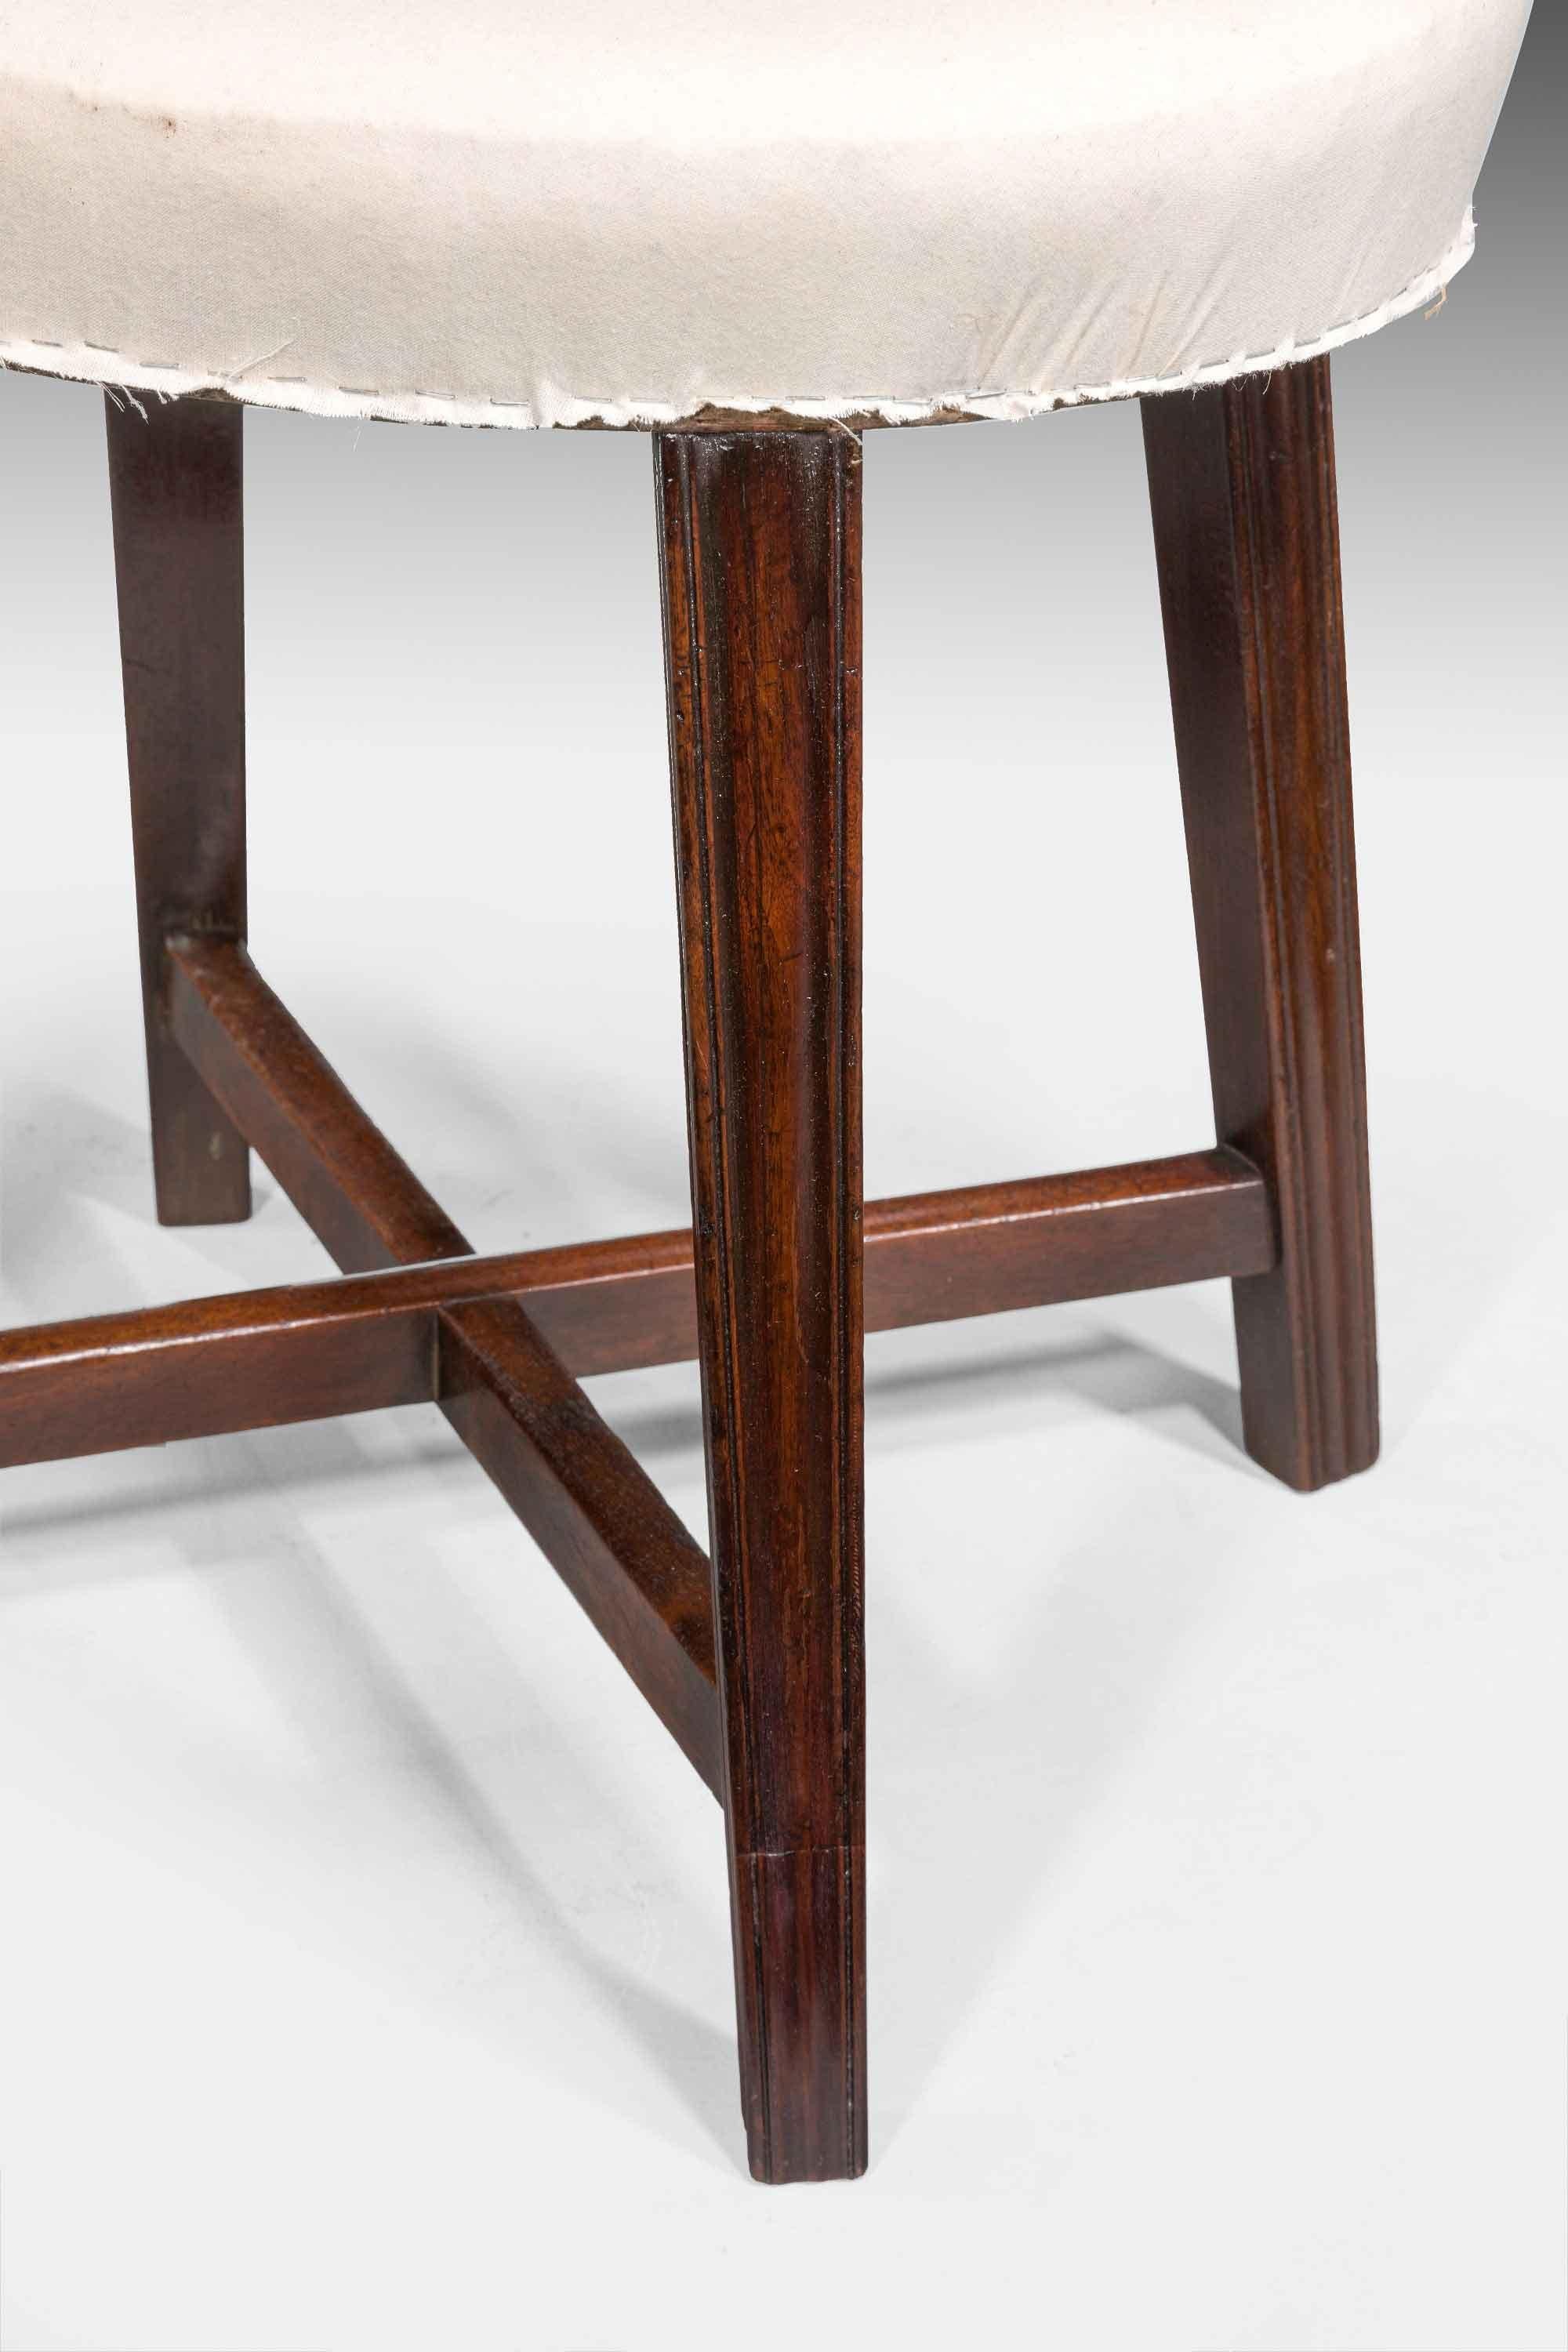 George III Period Mahogany Oval Stool In Good Condition In Peterborough, Northamptonshire